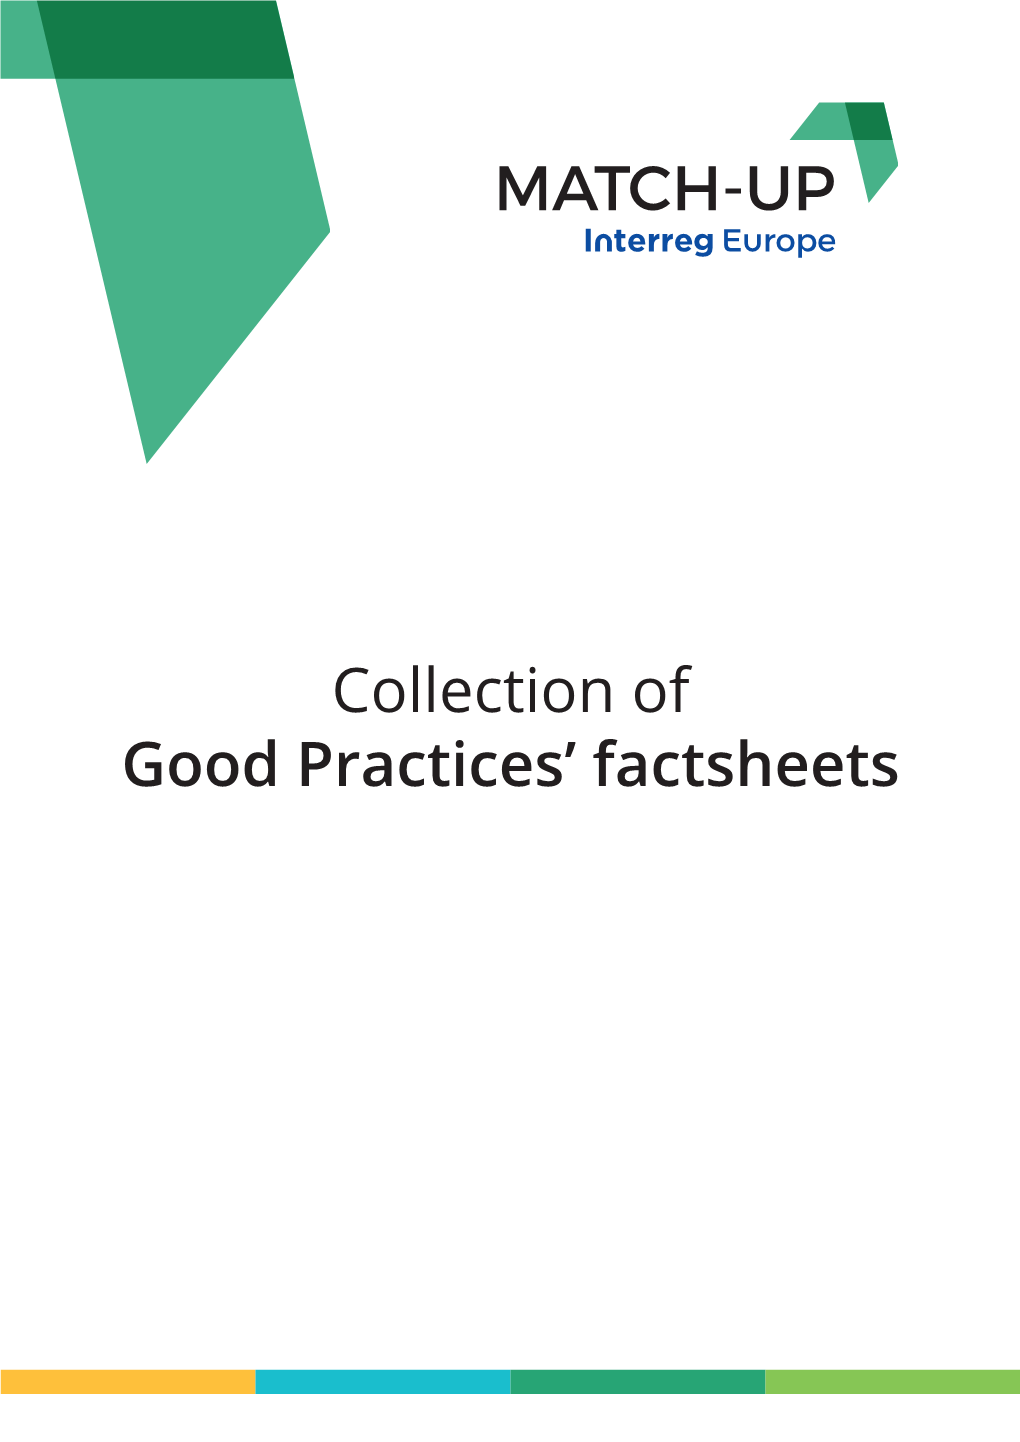 Collection of Good Practices' Factsheets